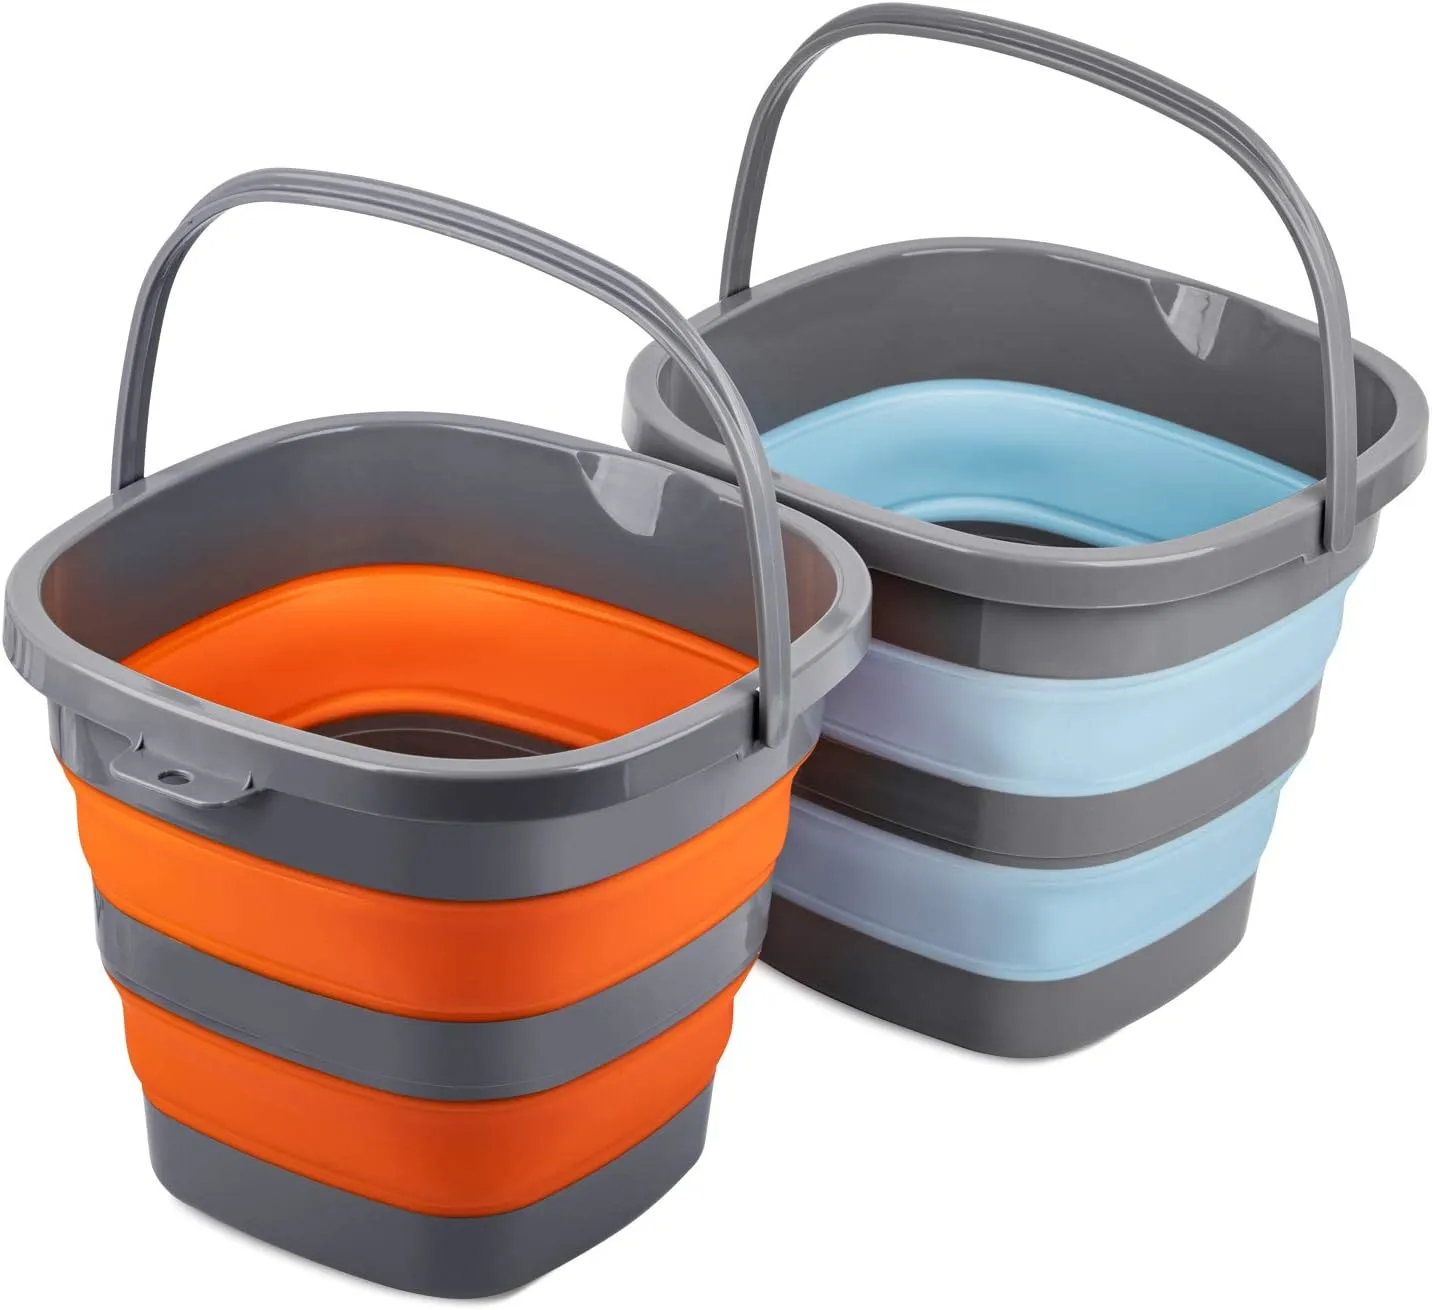 2 Pack Collapsible Plastic Bucket with 2.6 Gallon (10L) Each, Foldable Rectangular Tub for House Cleaning, Space Saving Outdoor Waterpot for Garden or Camping, Portable Fishing Water Pail